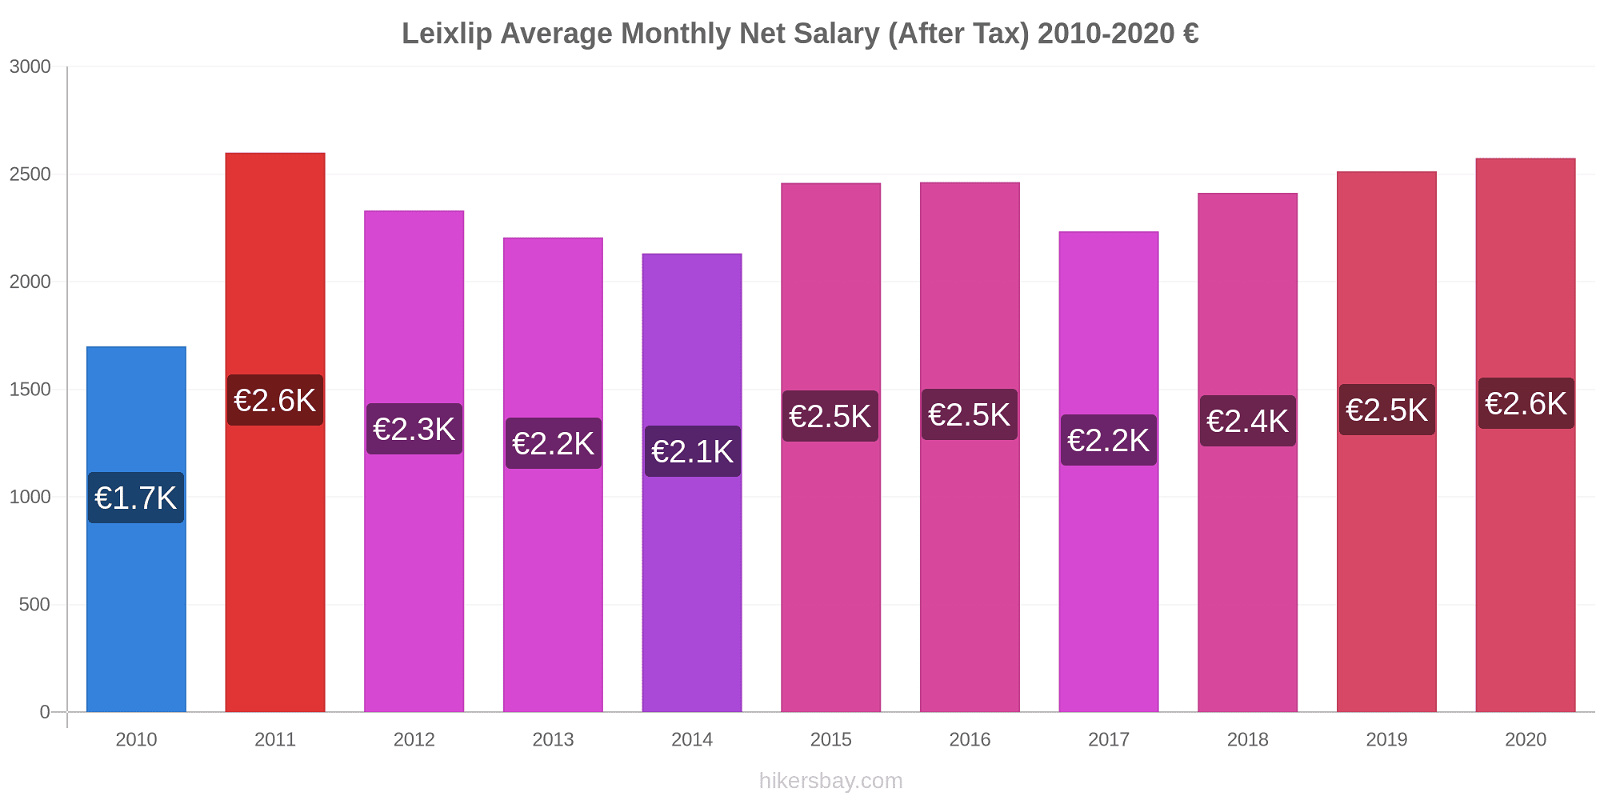 Leixlip price changes Average Monthly Net Salary (After Tax) hikersbay.com